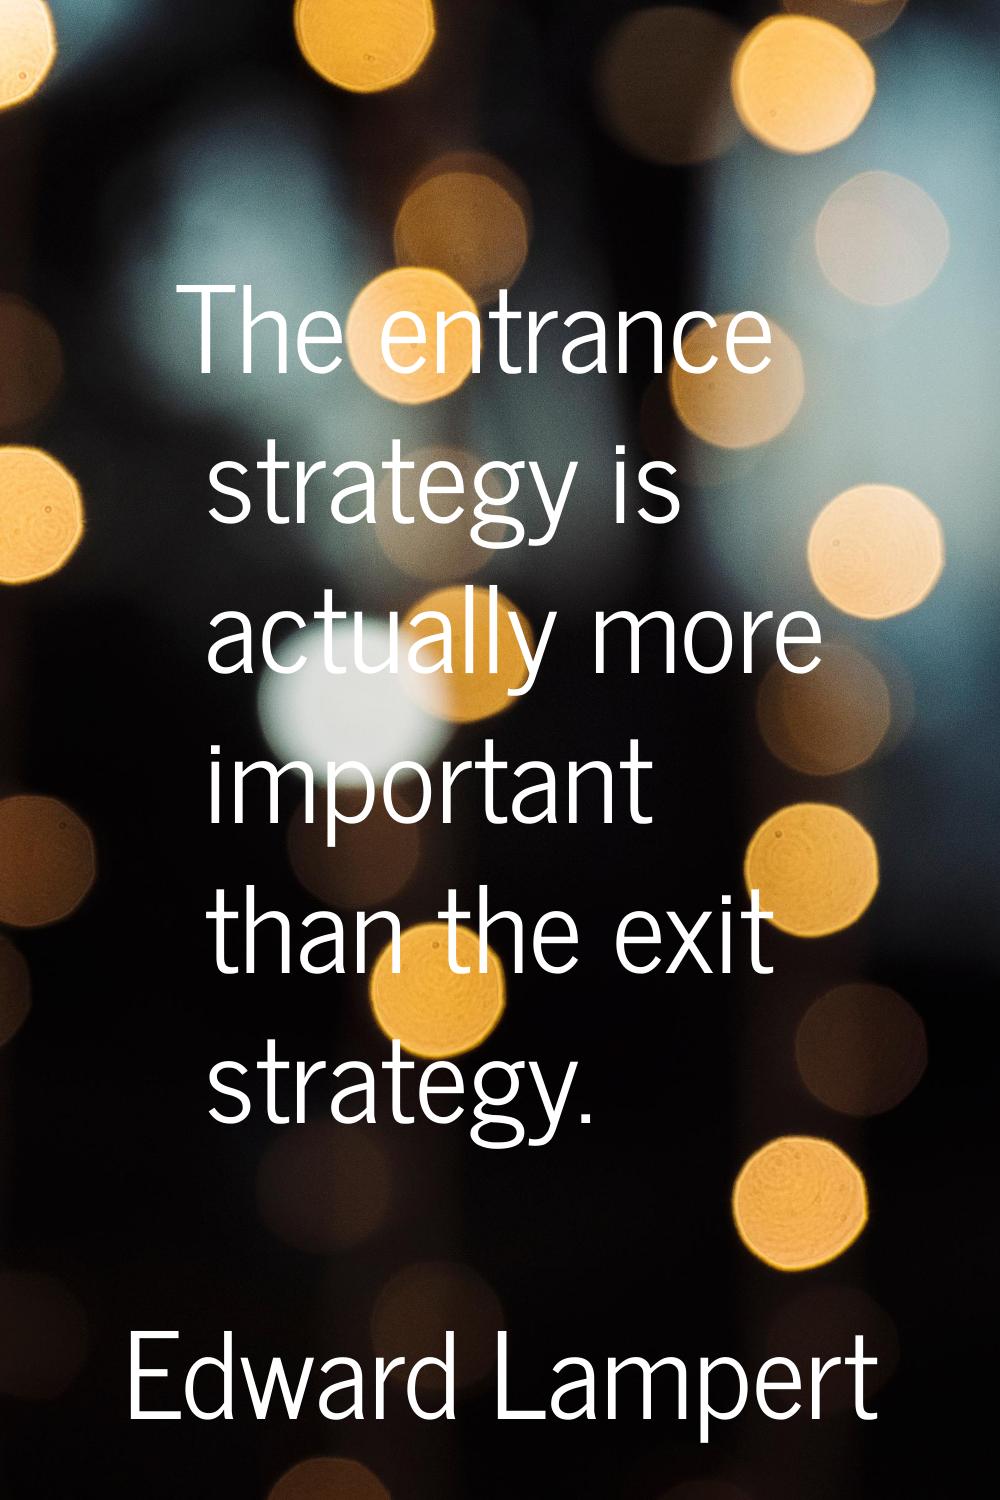 The entrance strategy is actually more important than the exit strategy.